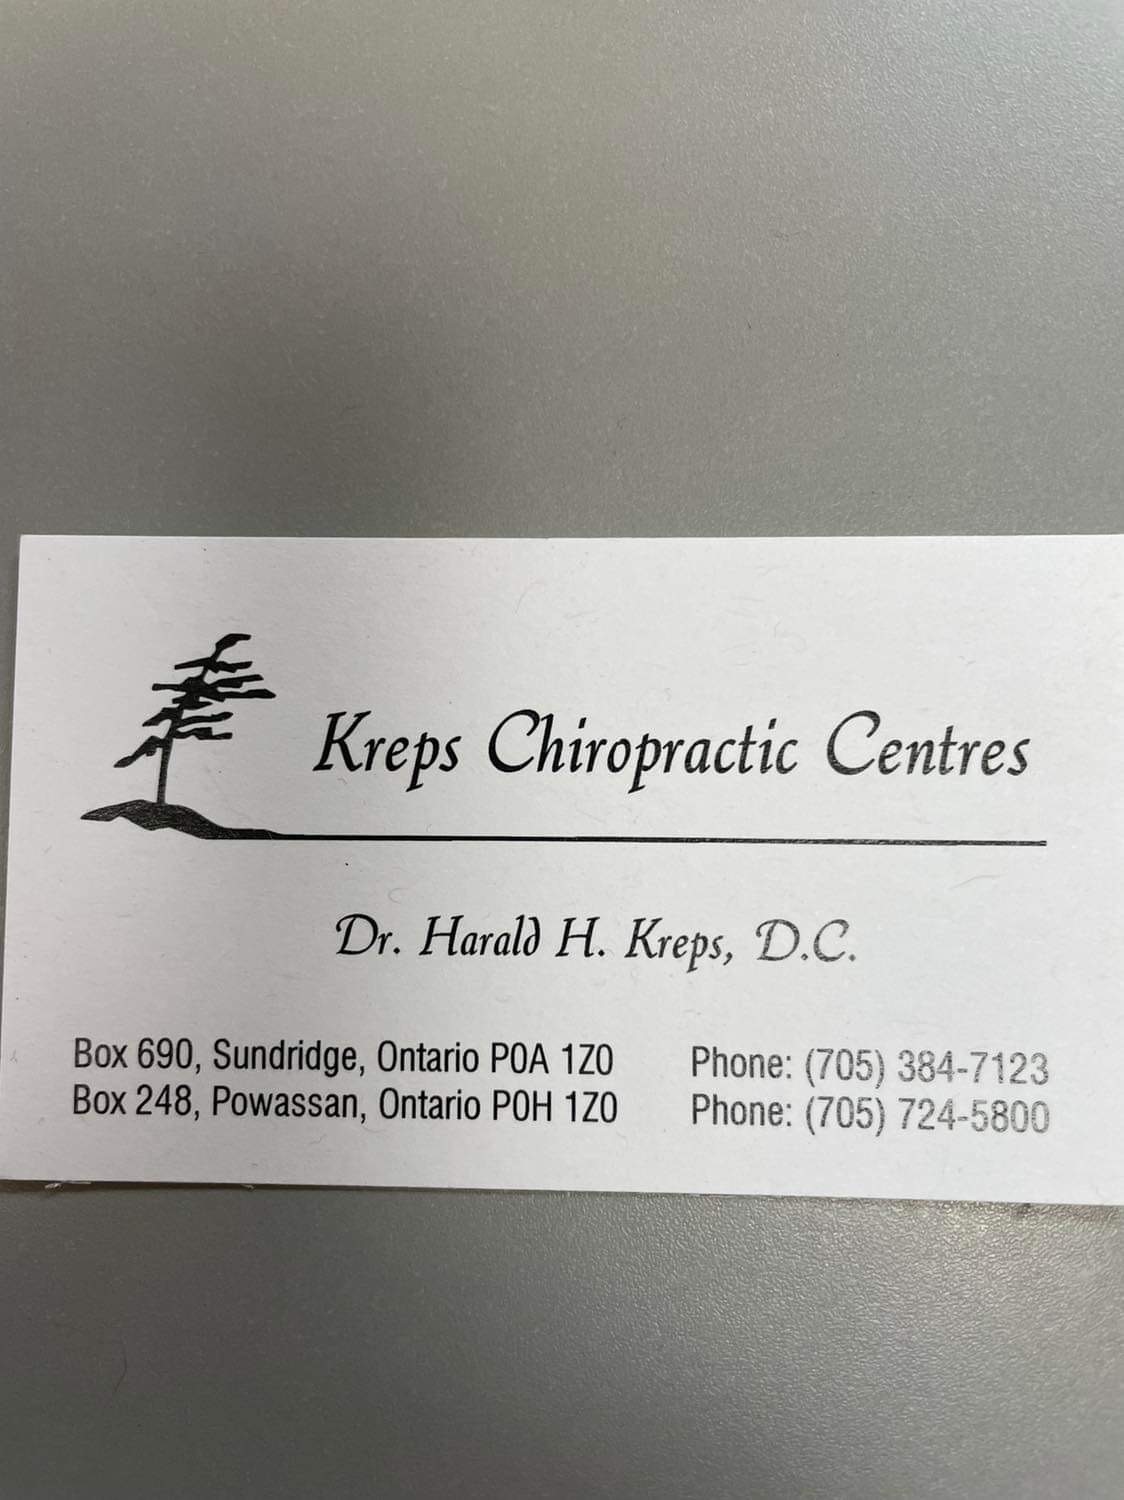 Kreps Chiropractic Centres